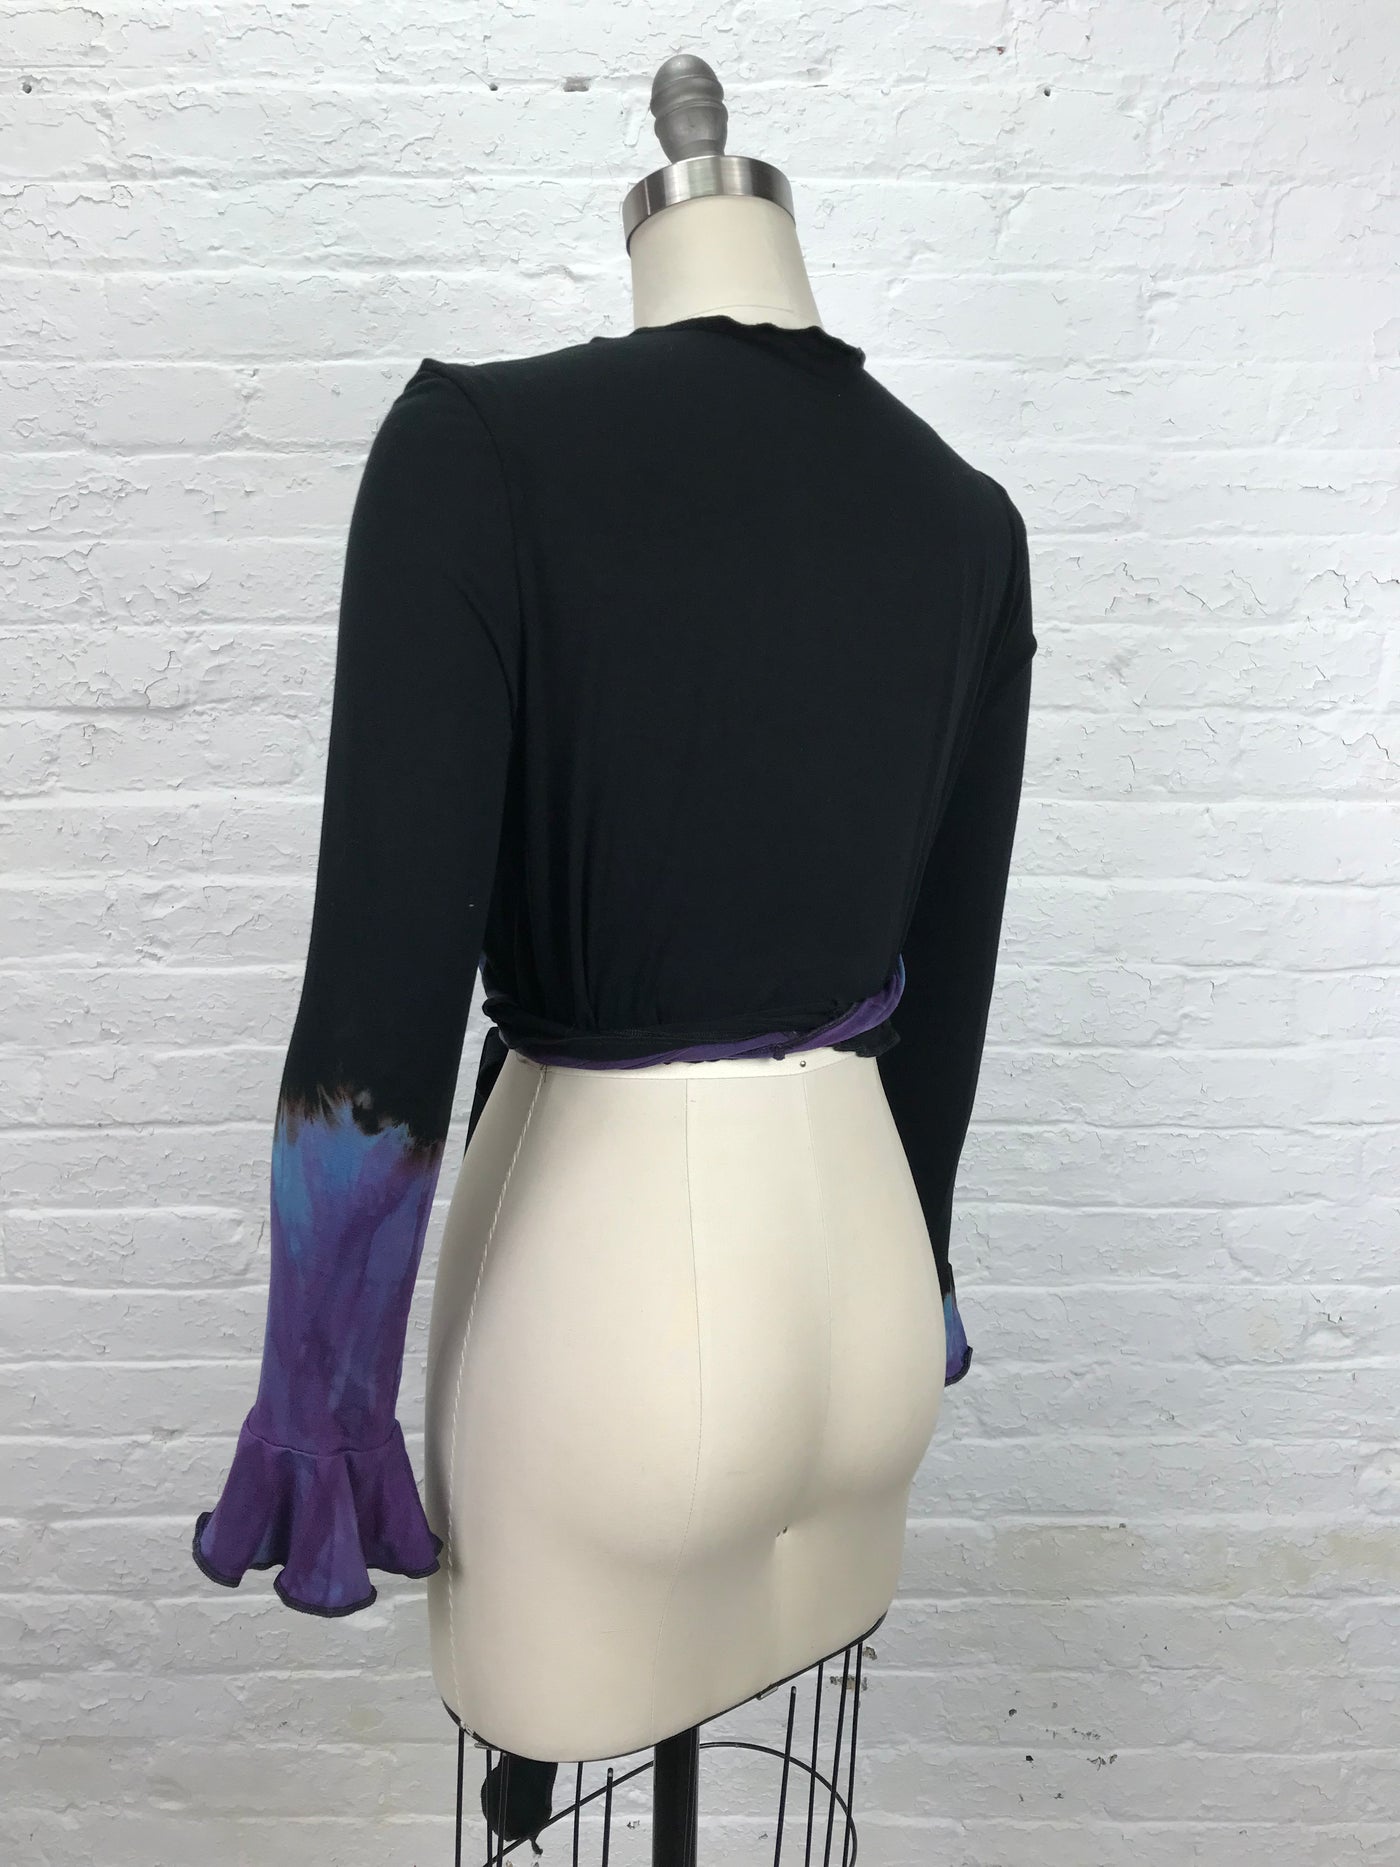 Flamenco Wrap Top in Black and Blue - back view